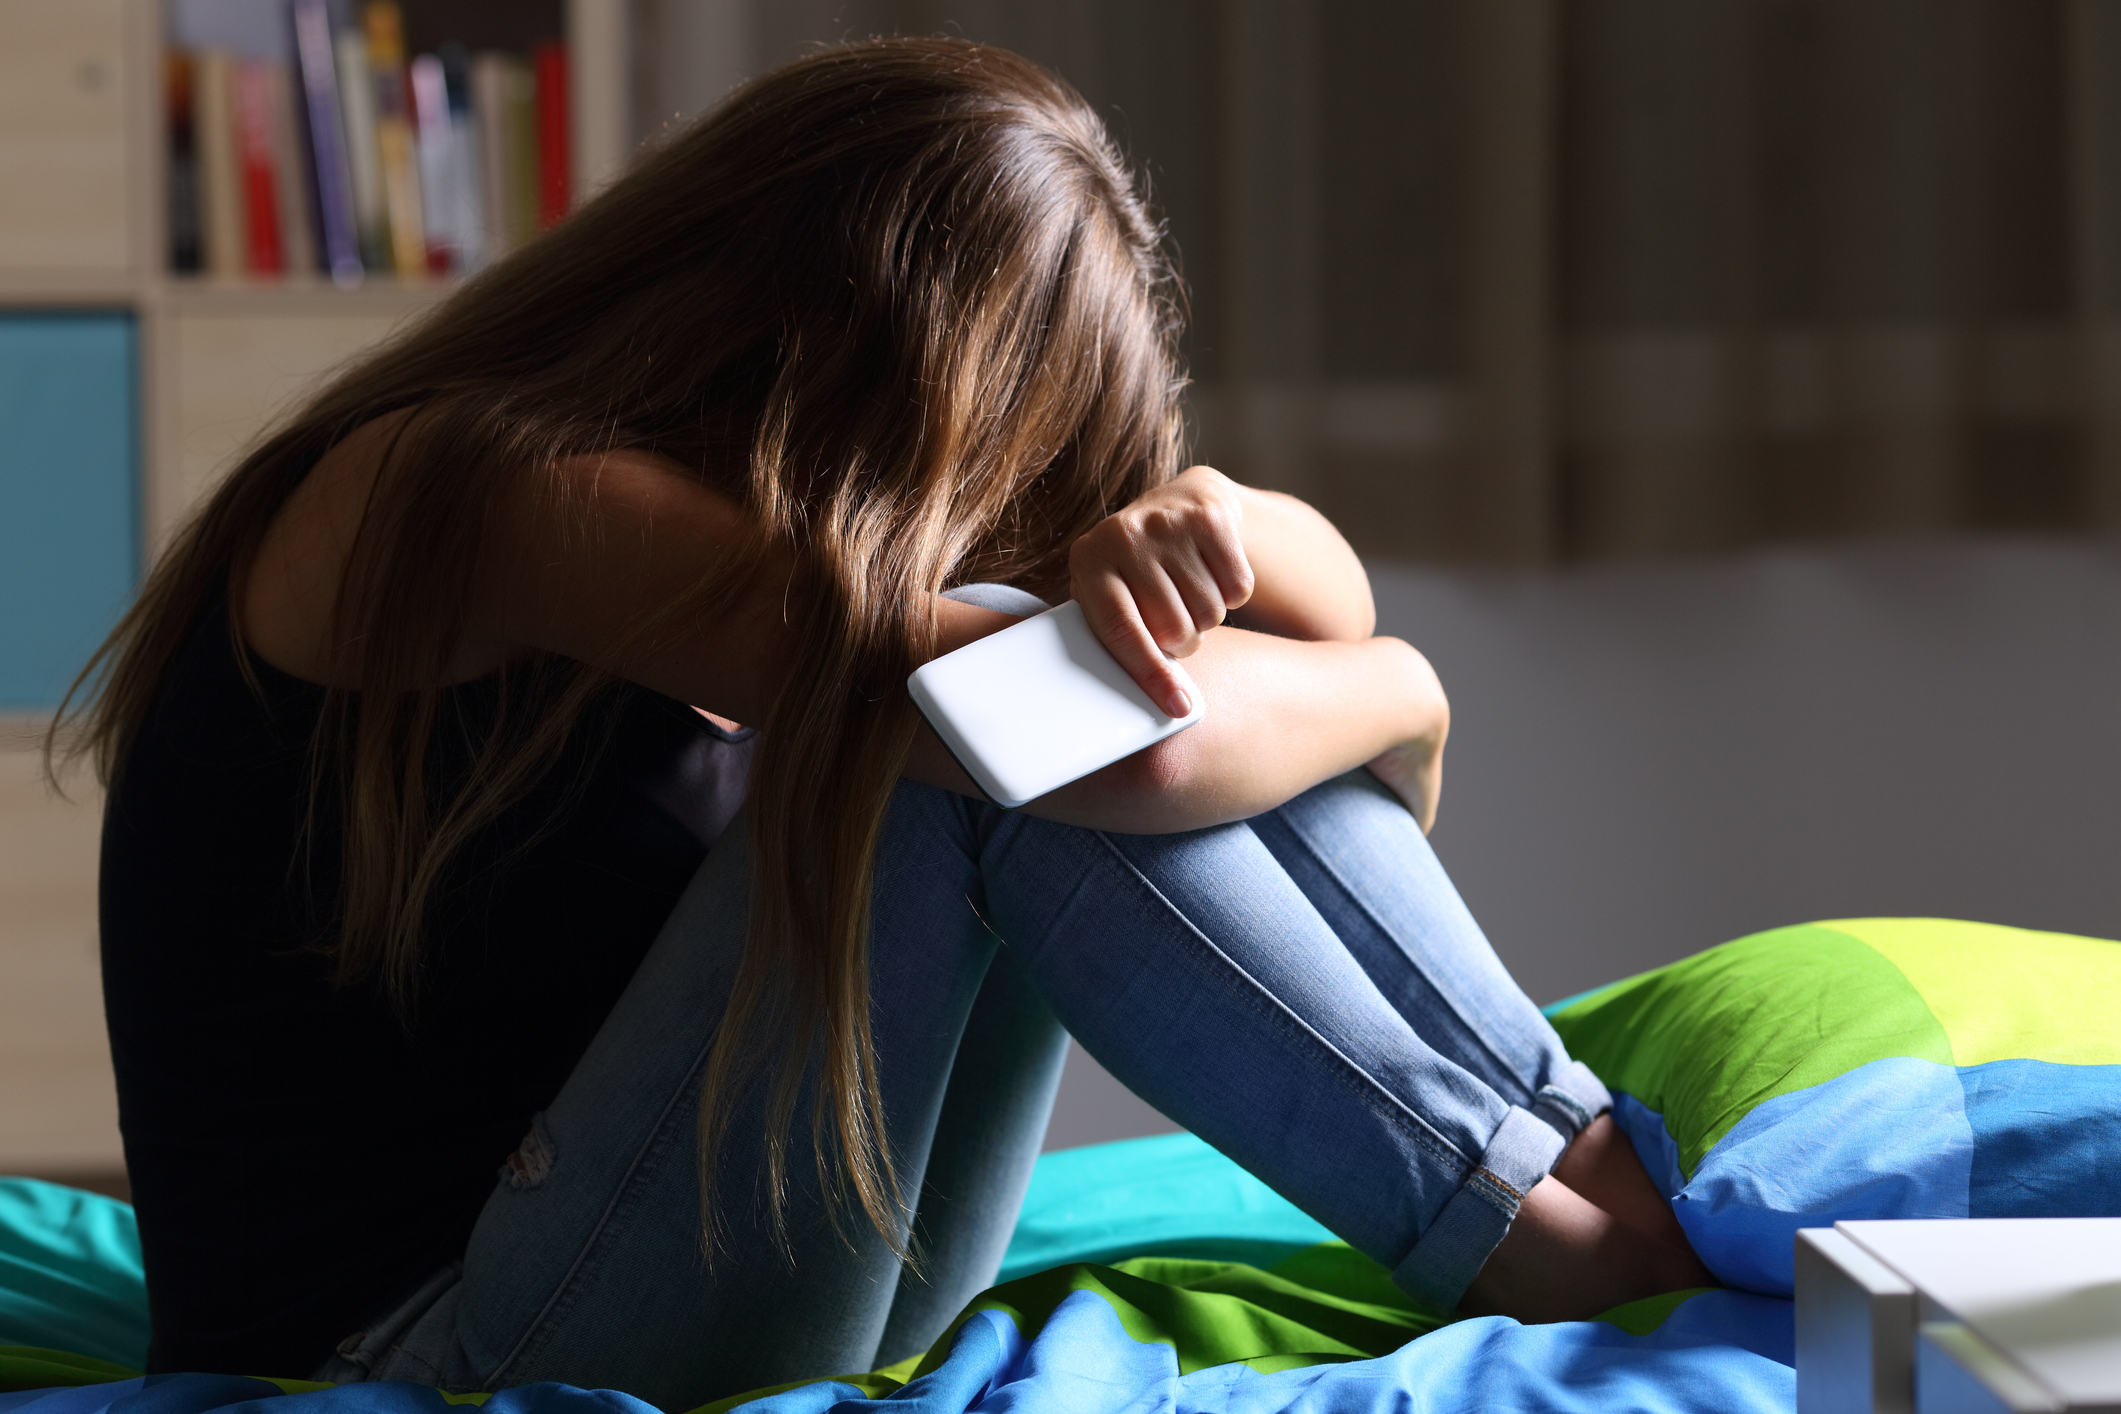 The biggest research study into how Scottish teenagers are bullied online reveals there is little parents can do to ease the toll of suffering